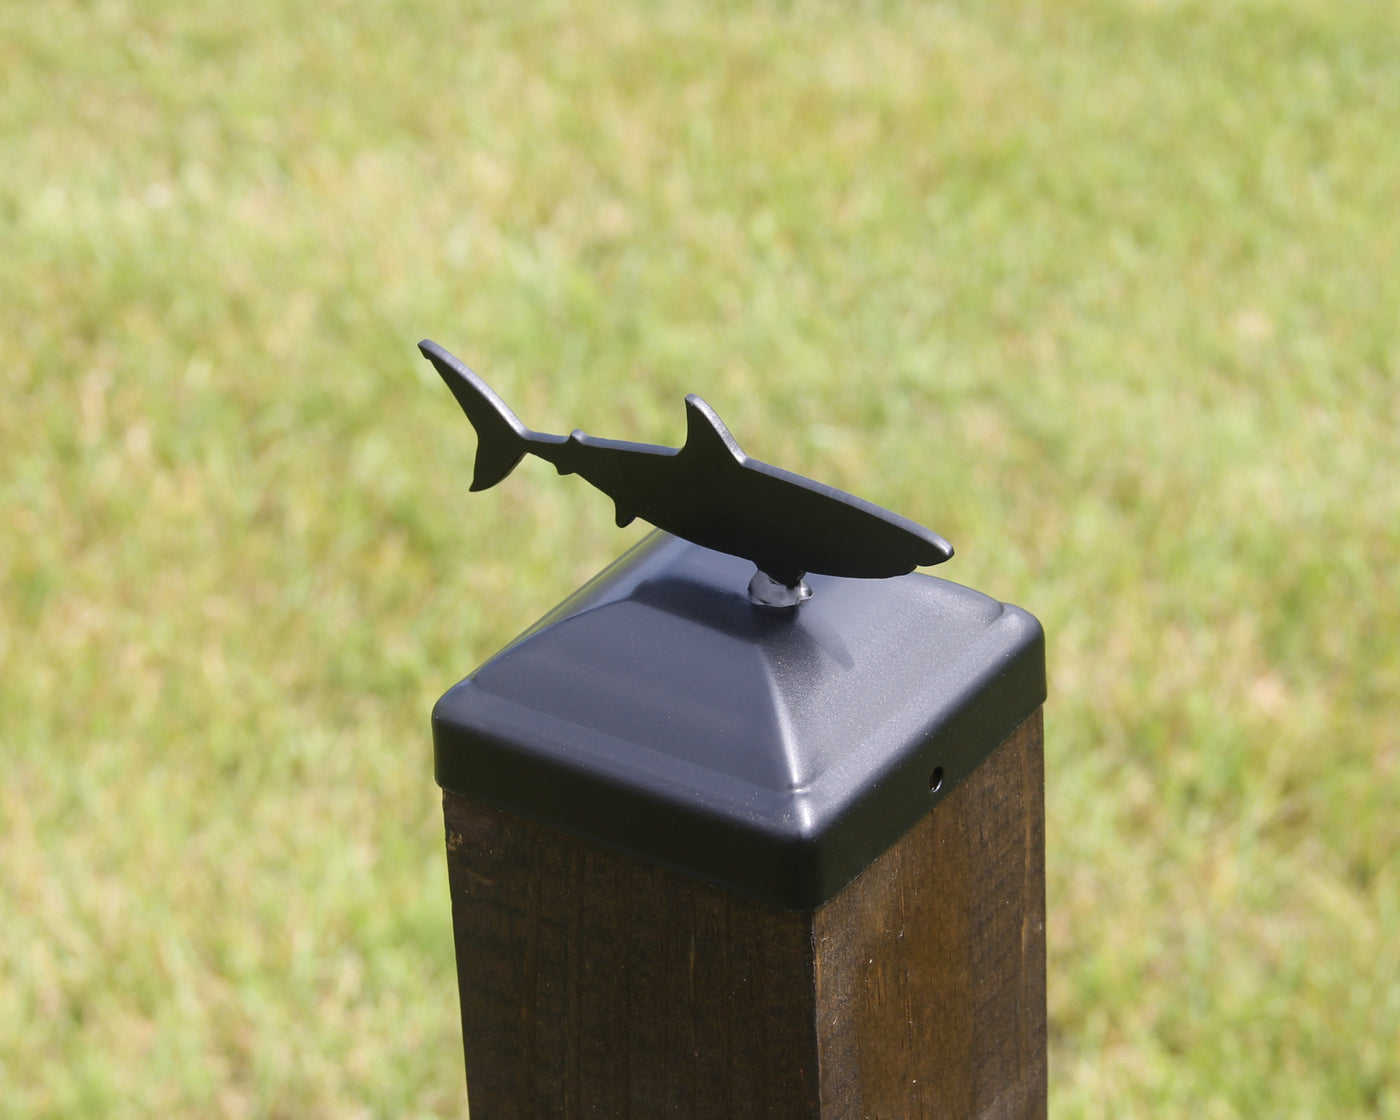 4X4 Shark Post Cap - Madison Iron and Wood - Post Cap - metal outdoor decor - Steel deocrations - american made products - veteran owned business products - fencing decorations - fencing supplies - custom wall decorations - personalized wall signs - steel - decorative post caps - steel post caps - metal post caps - brackets - structural brackets - home improvement - easter - easter decorations - easter gift - easter yard decor